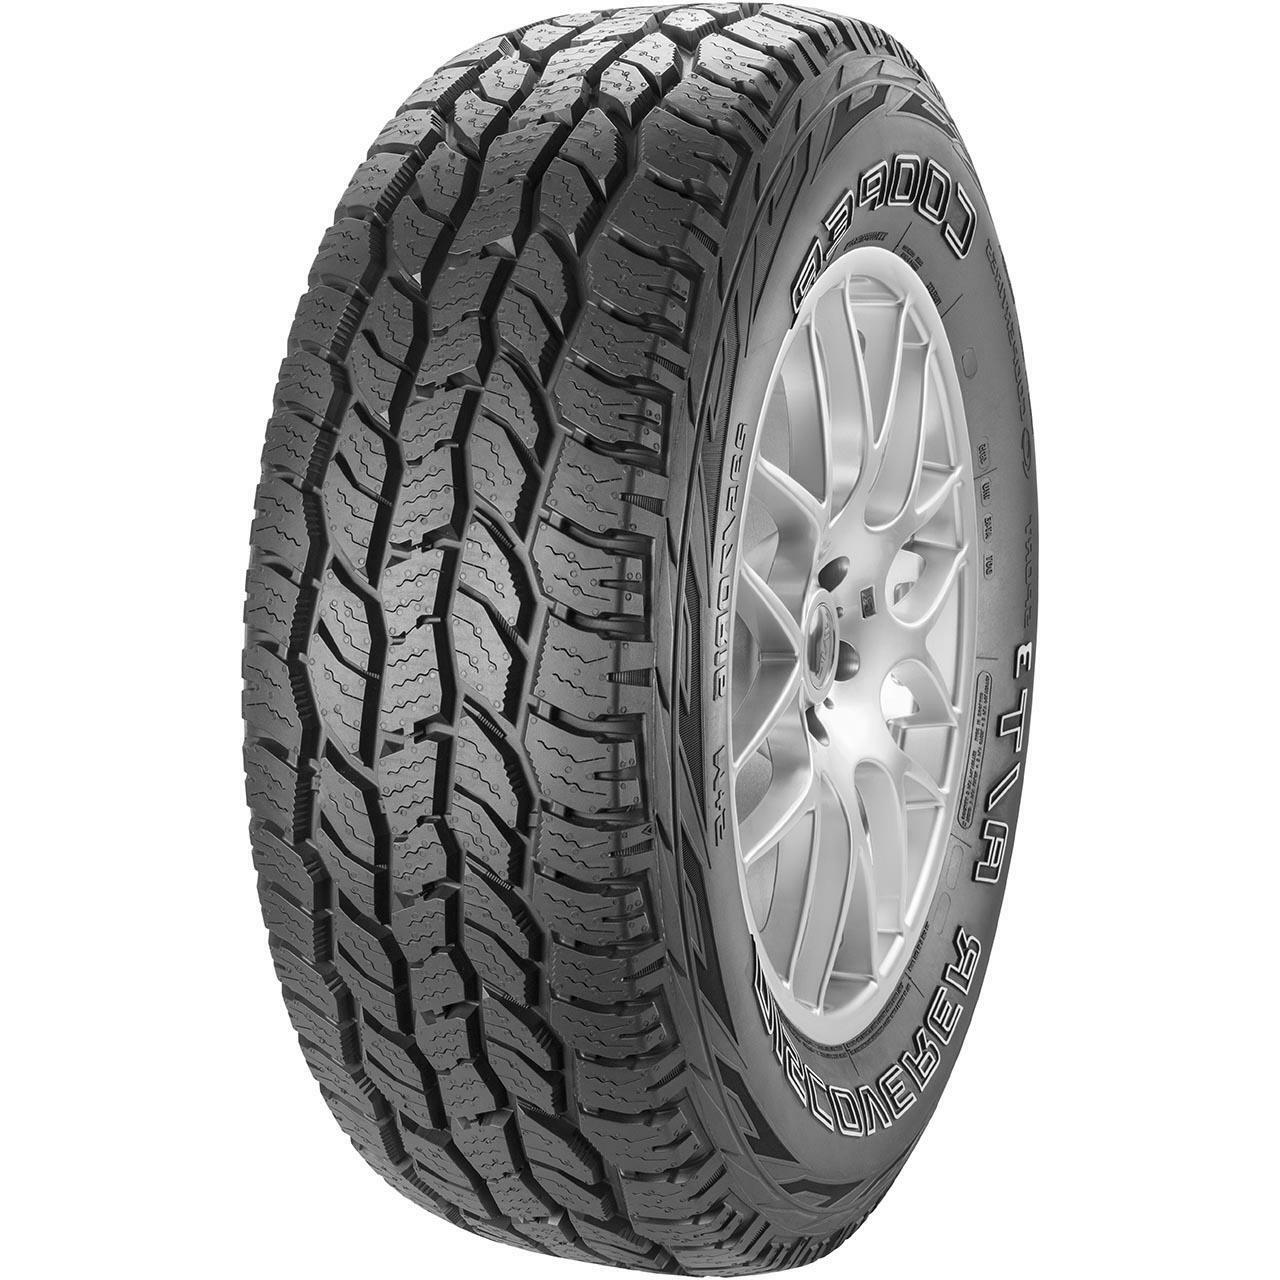 285/60 R18 120T XL DISCOVERER A/T3 SPORT BSW COOPER